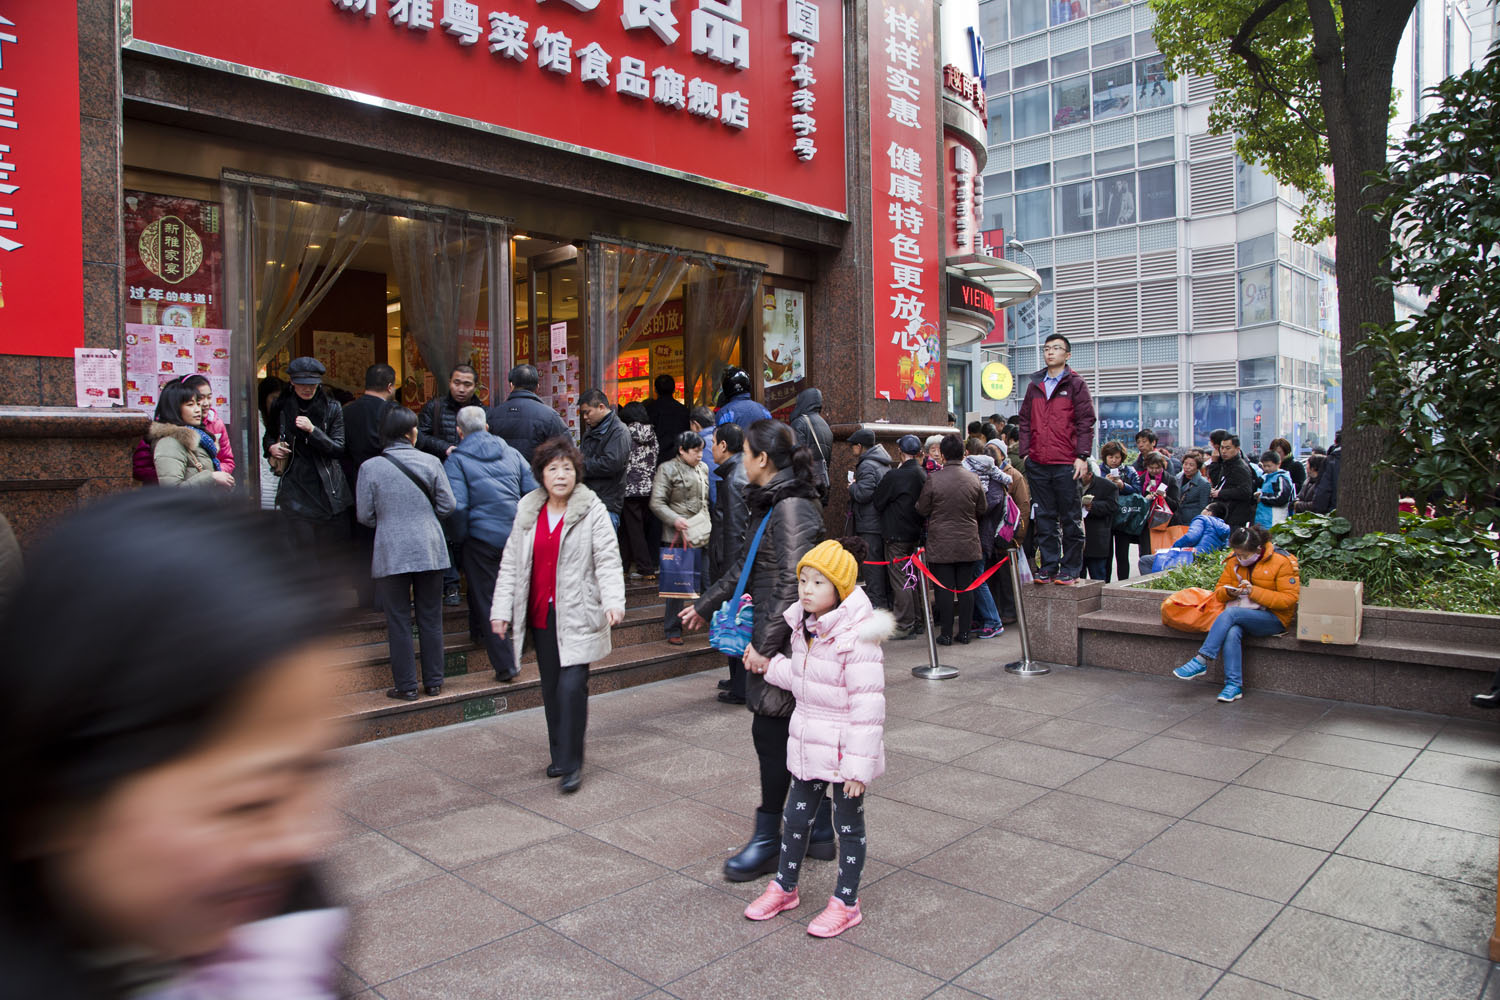 A young girl in a yellow hat standing in the midst of a crowded Nanjing East Road. Shanghai, China. 2014. 